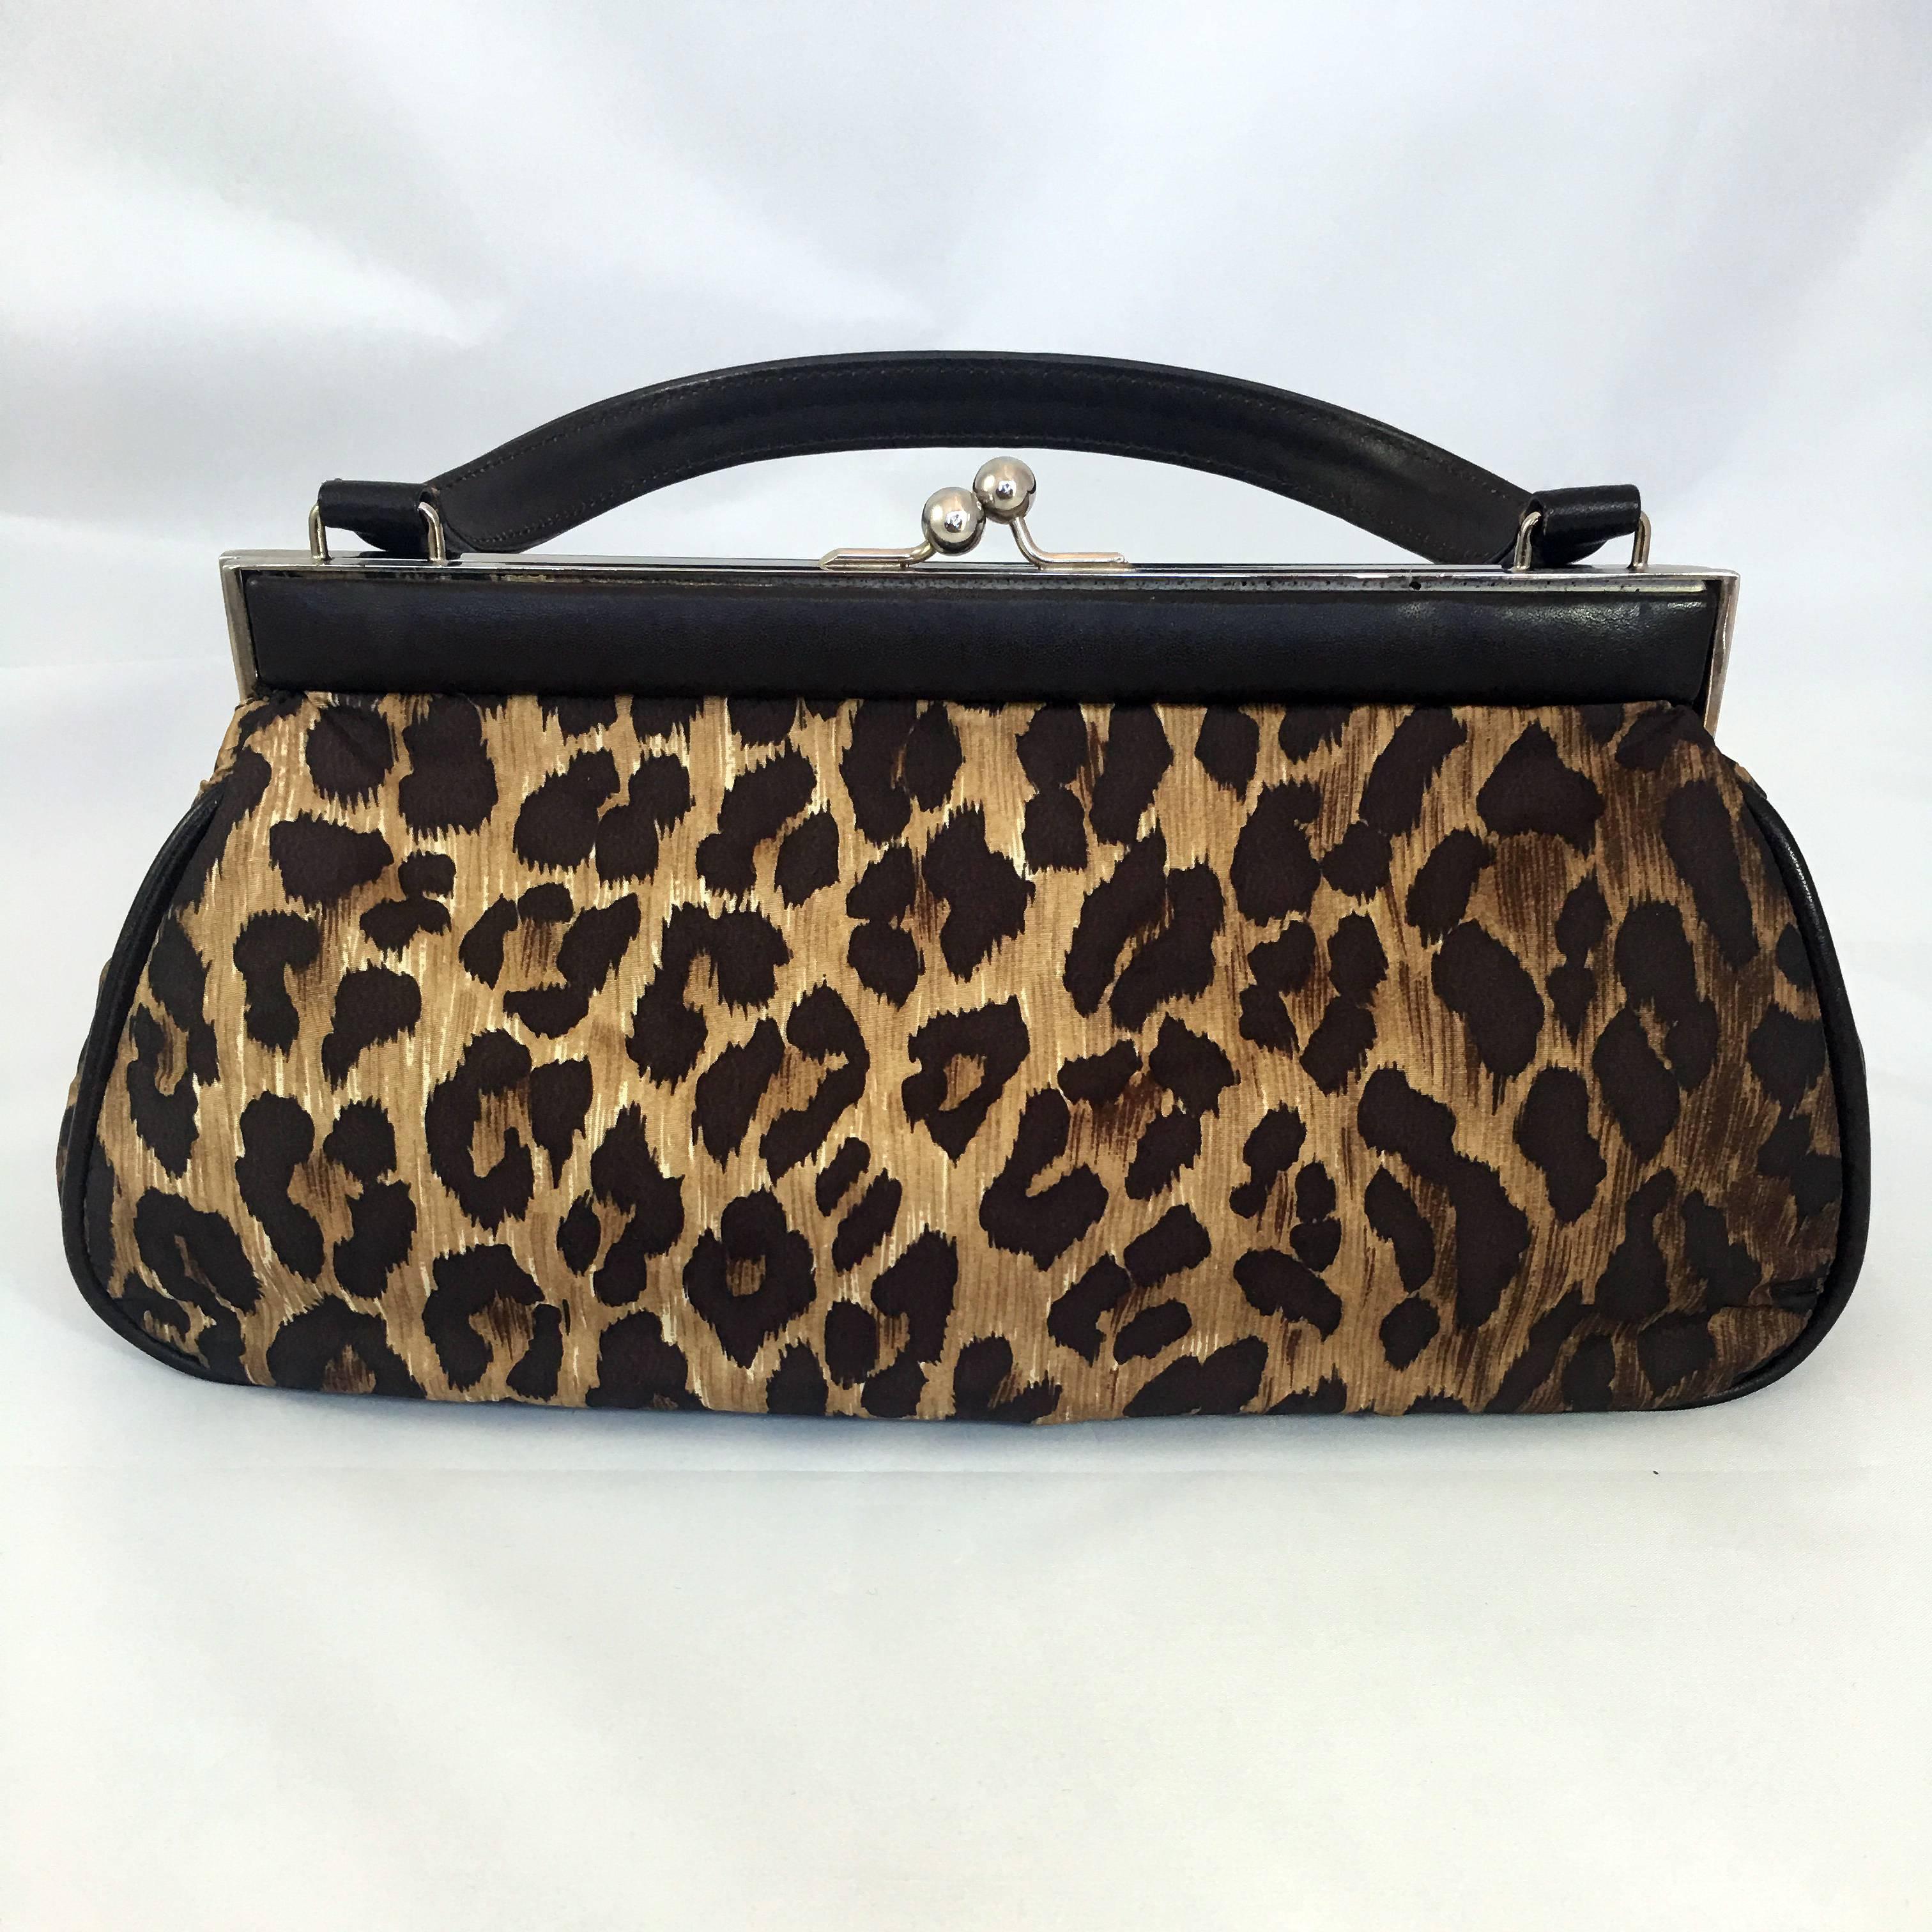 Dolce and Gabbana leopard-print fabric satchel  with a top flat handle, the bag features brass tone hardware and black leather top.

Messurments:
6.5" Tall X11.5" Wide X 3.5" Deep
Handle Drop: 4.5"

Good Vintage Condition: Please